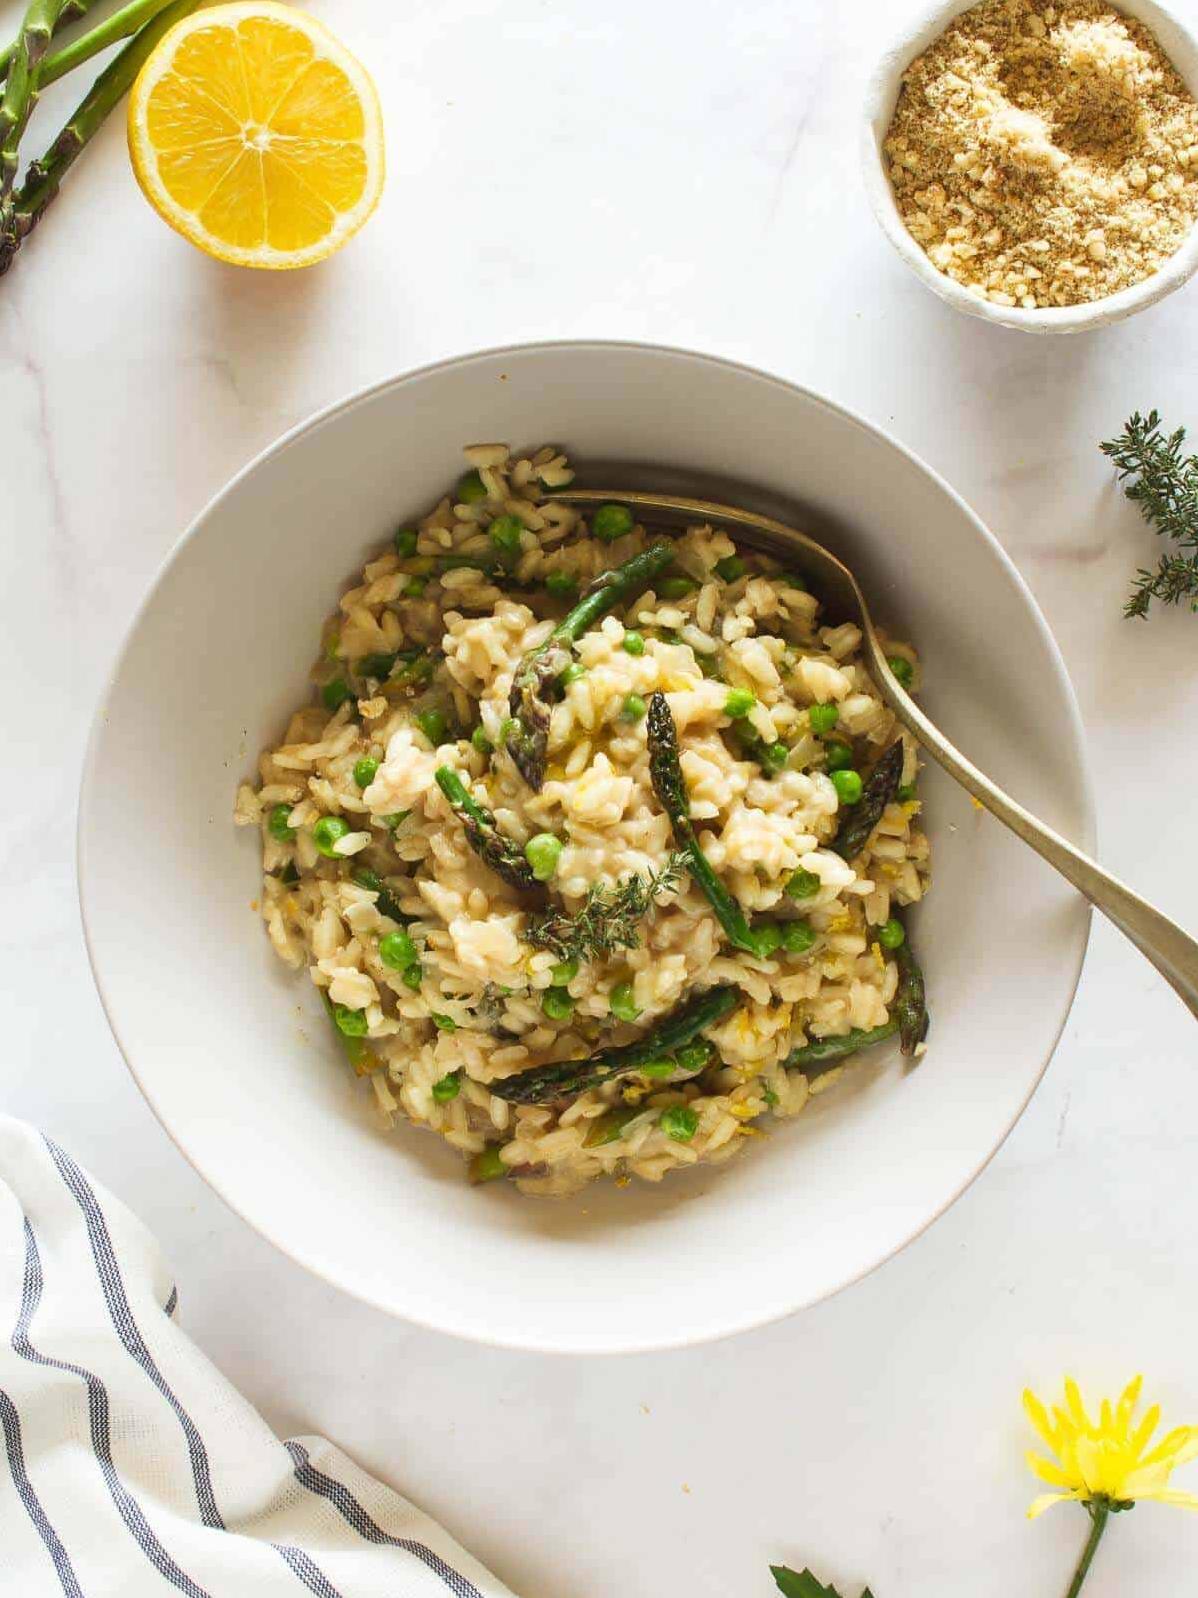  You won't miss the traditional non-vegan version of risotto!